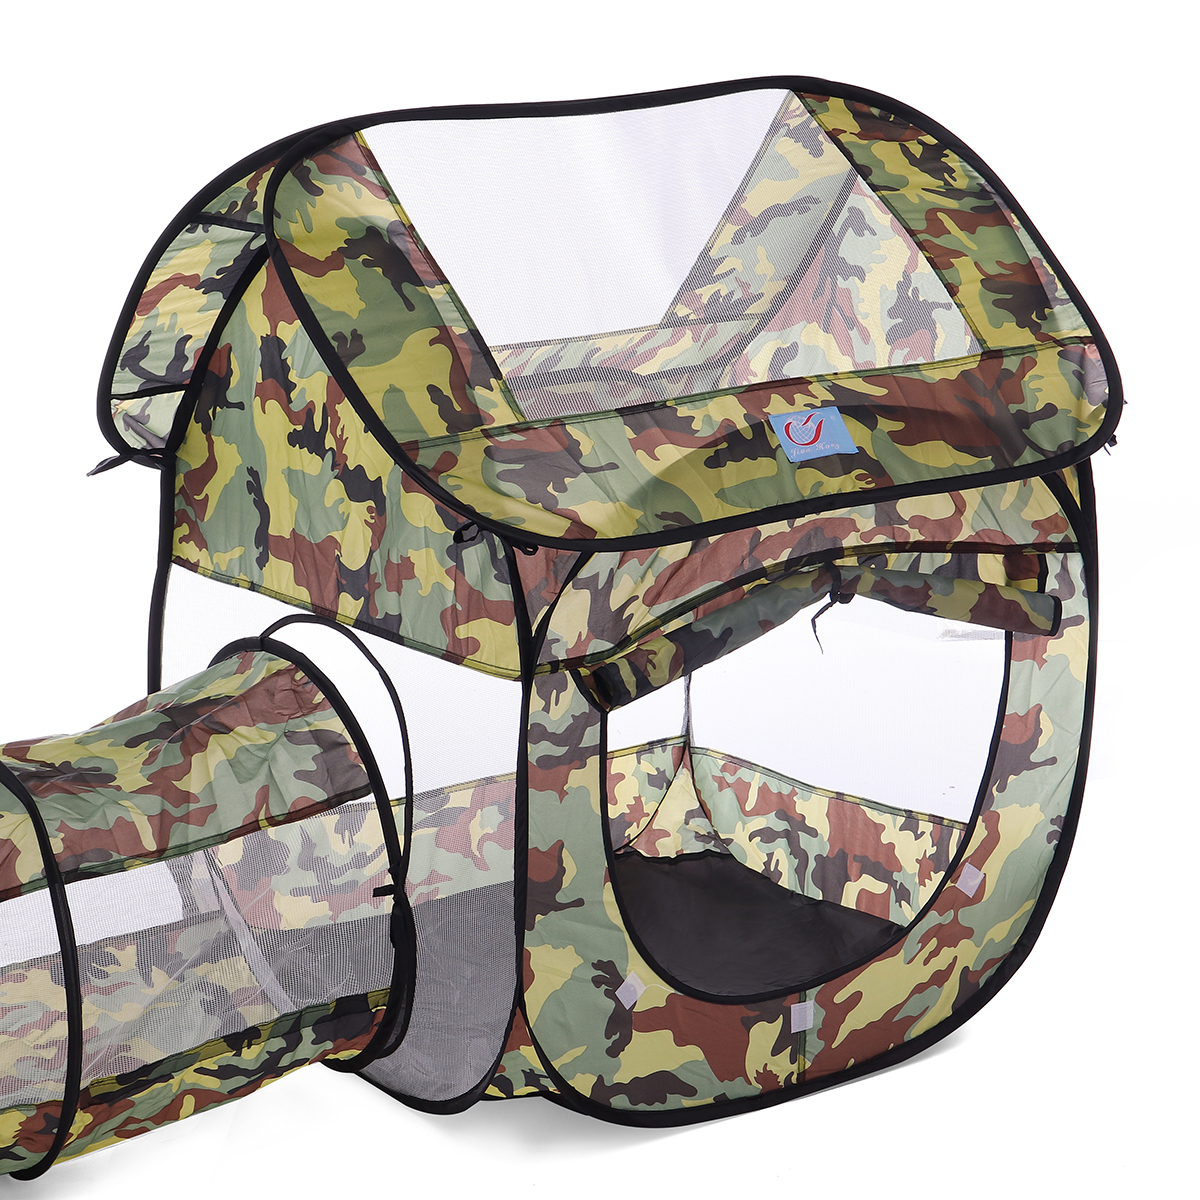 3pcs/Set Kids Play Tent Crawling Tunnel Foldable Camouflage Children Tent House Toys Portable Tunnel Game Toy